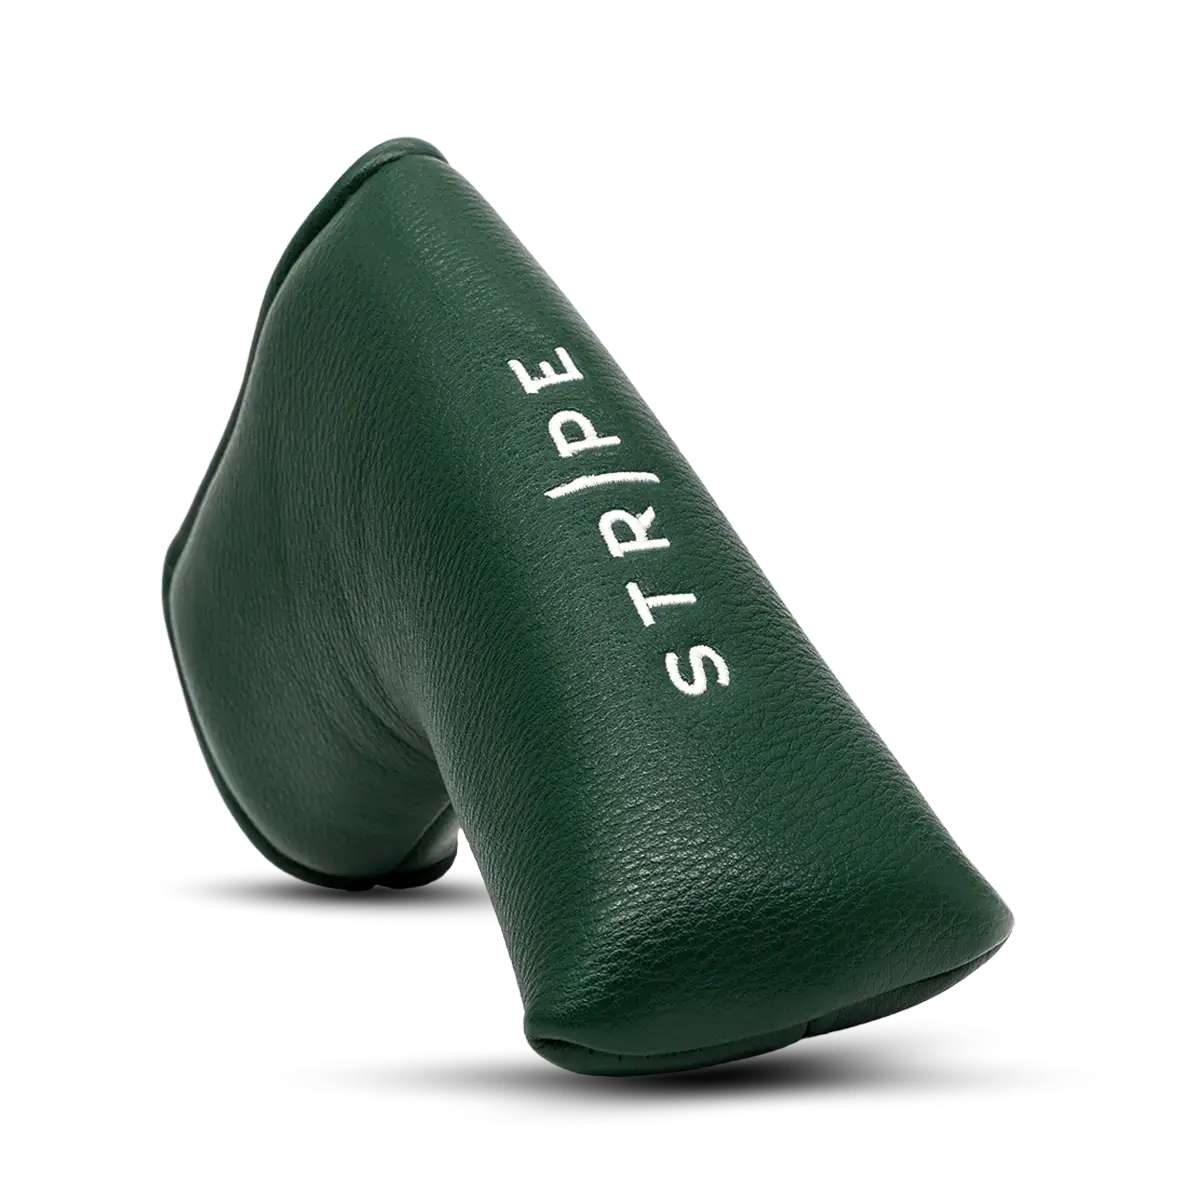 Side-front view of a headcover in green leather, designed to protect your golf club. Combining fashion with function, it's the perfect shield for your club.